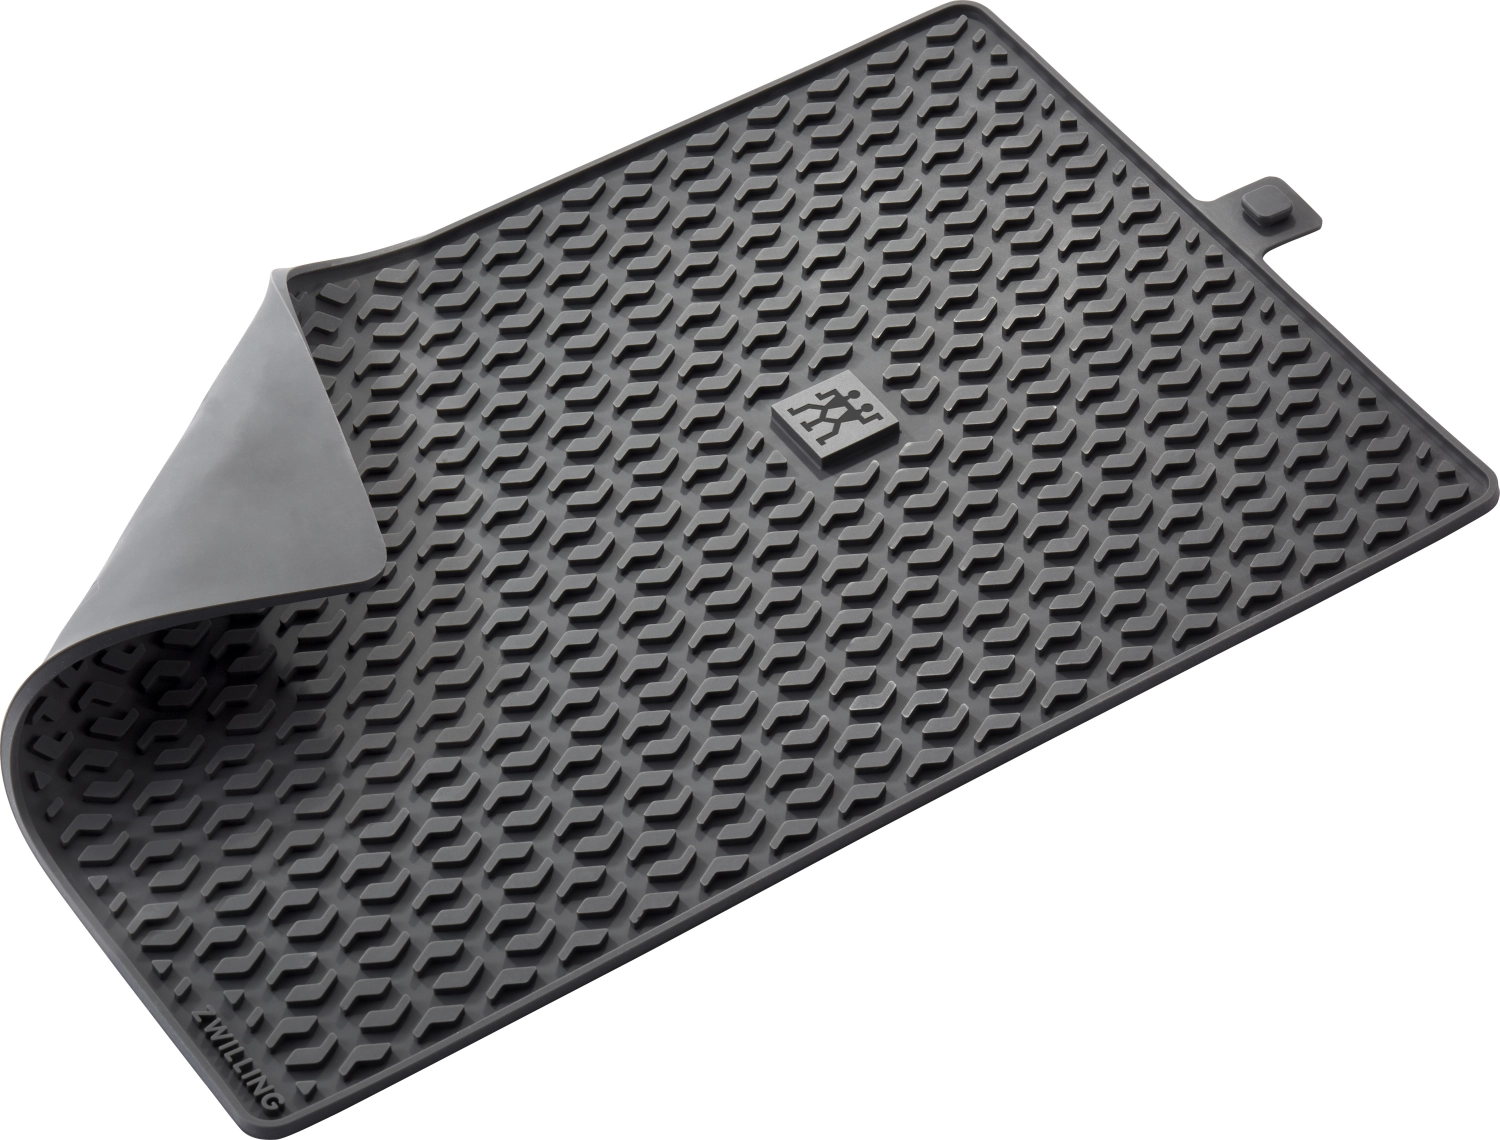 Bbq+ tapis en silicone enroulable, 45x31cm